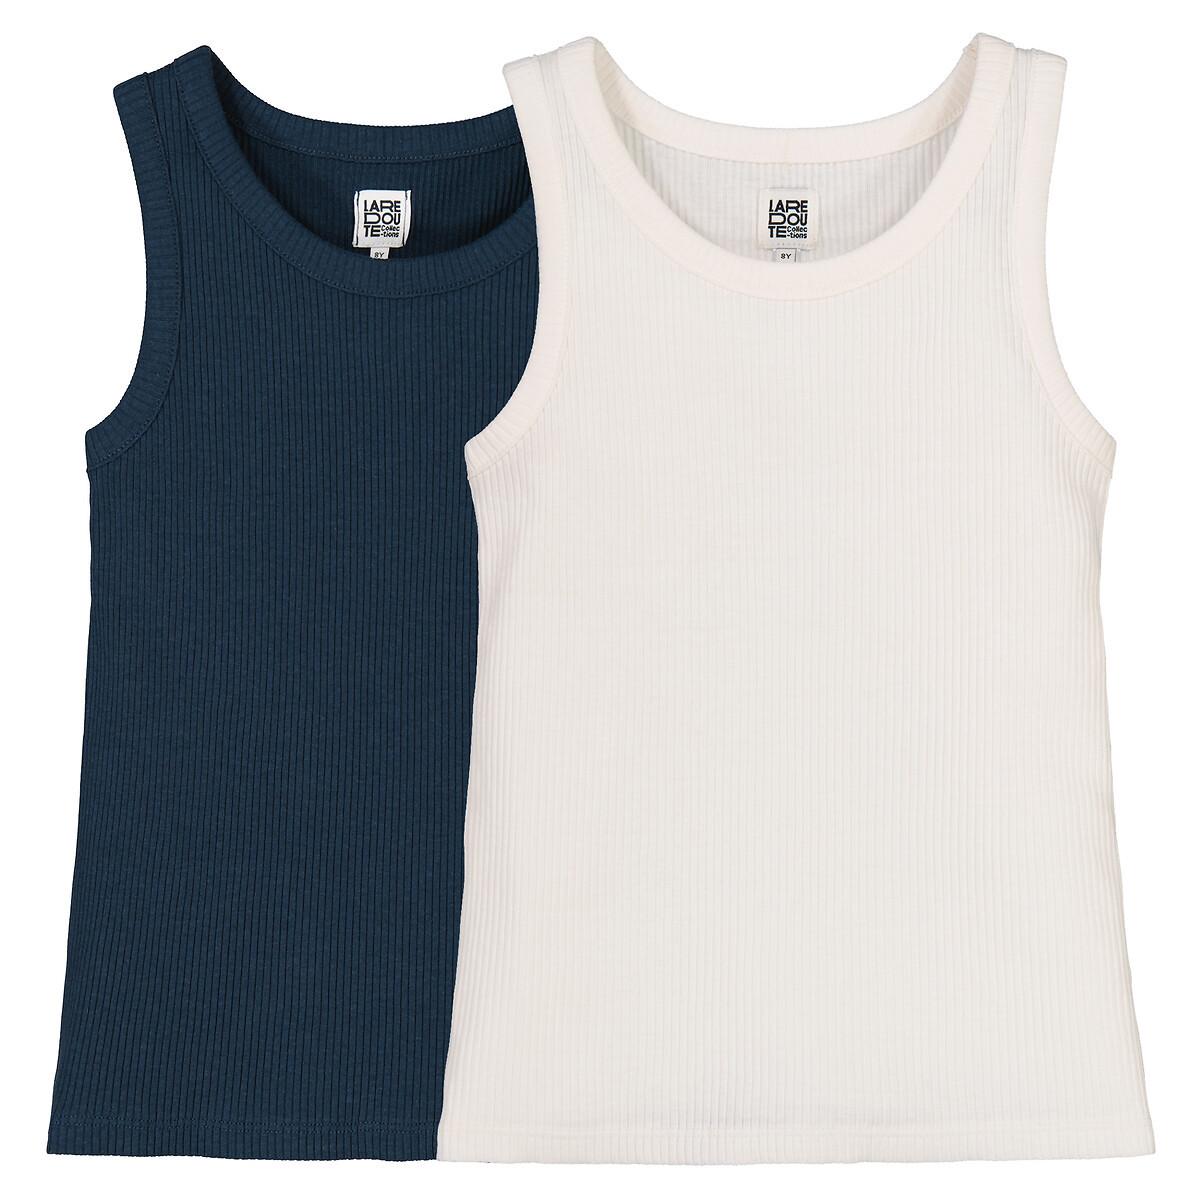 La Redoute Collections  2er-Pack gerippte Trägershirts 